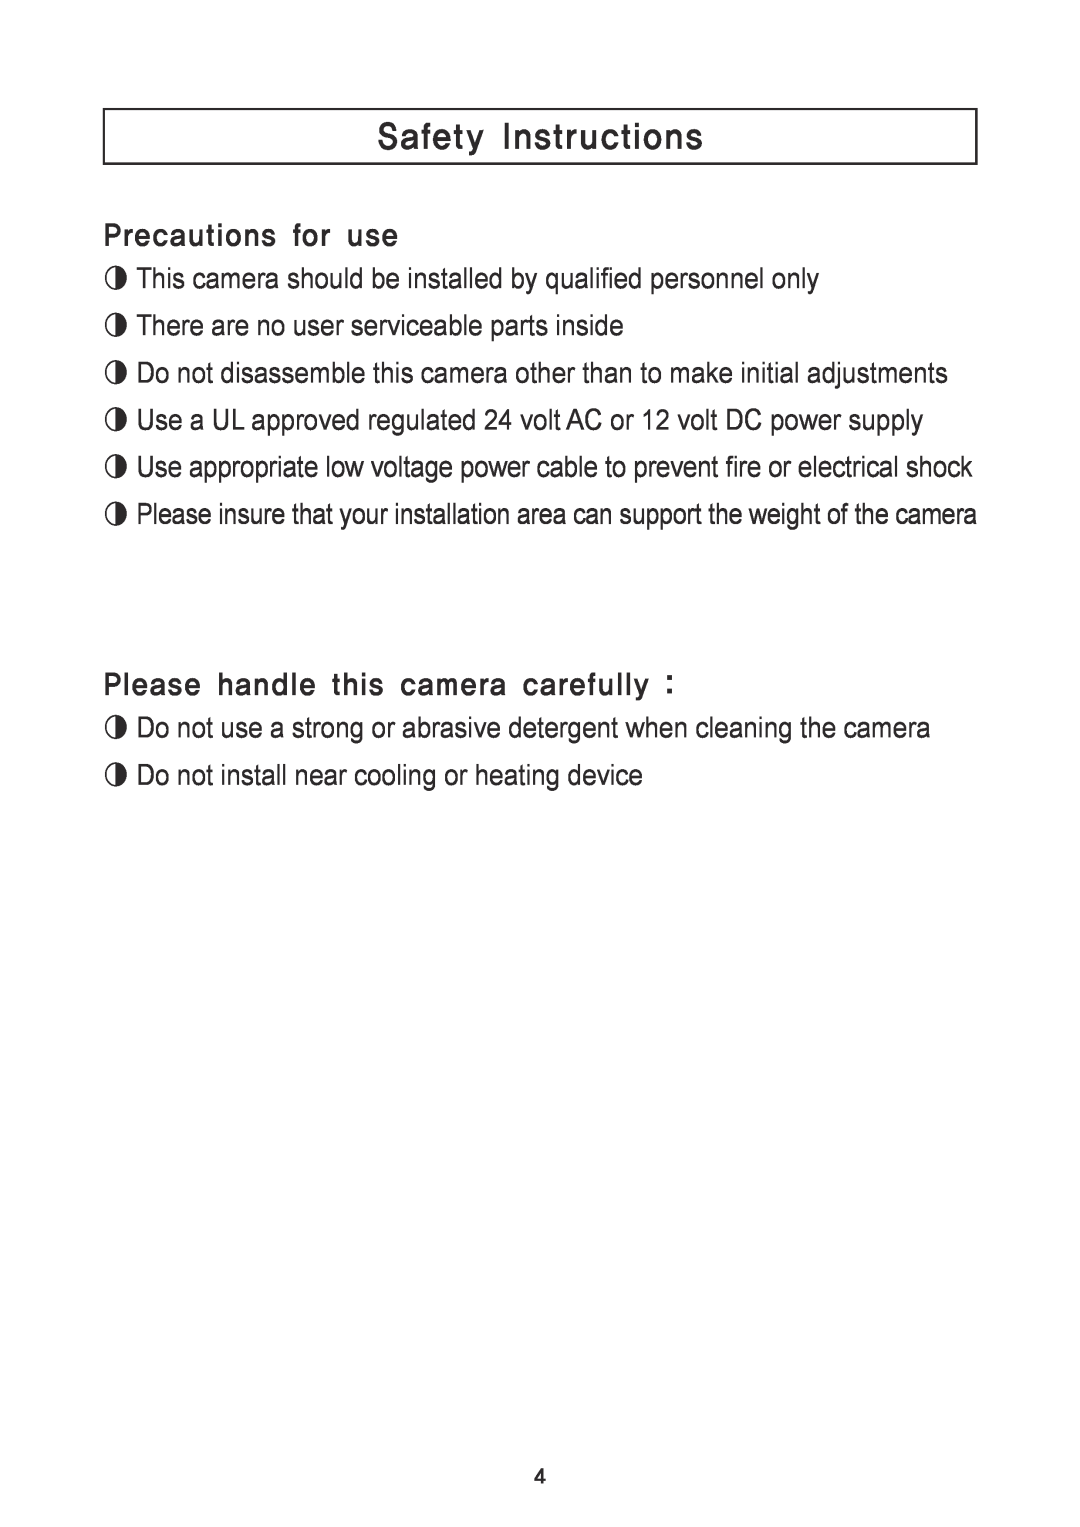 Speco Technologies VL7038IRVF, VL7039IRVF Safety Instructions, Precautions for use, Please handle this camera carefully 